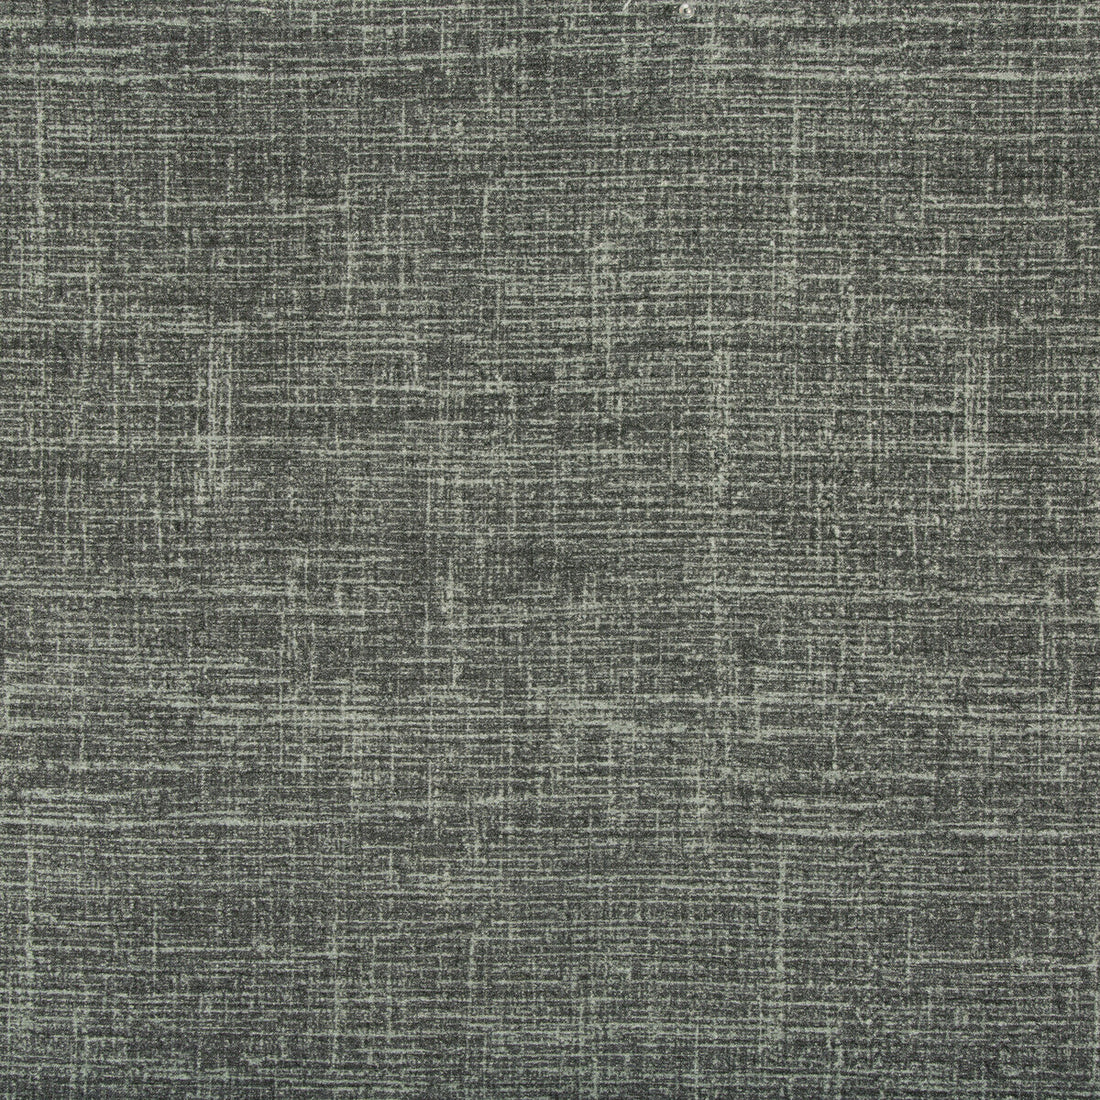 Assemblage fabric in atmosphere color - pattern 35384.21.0 - by Kravet Design in the Nate Berkus Well-Traveled collection